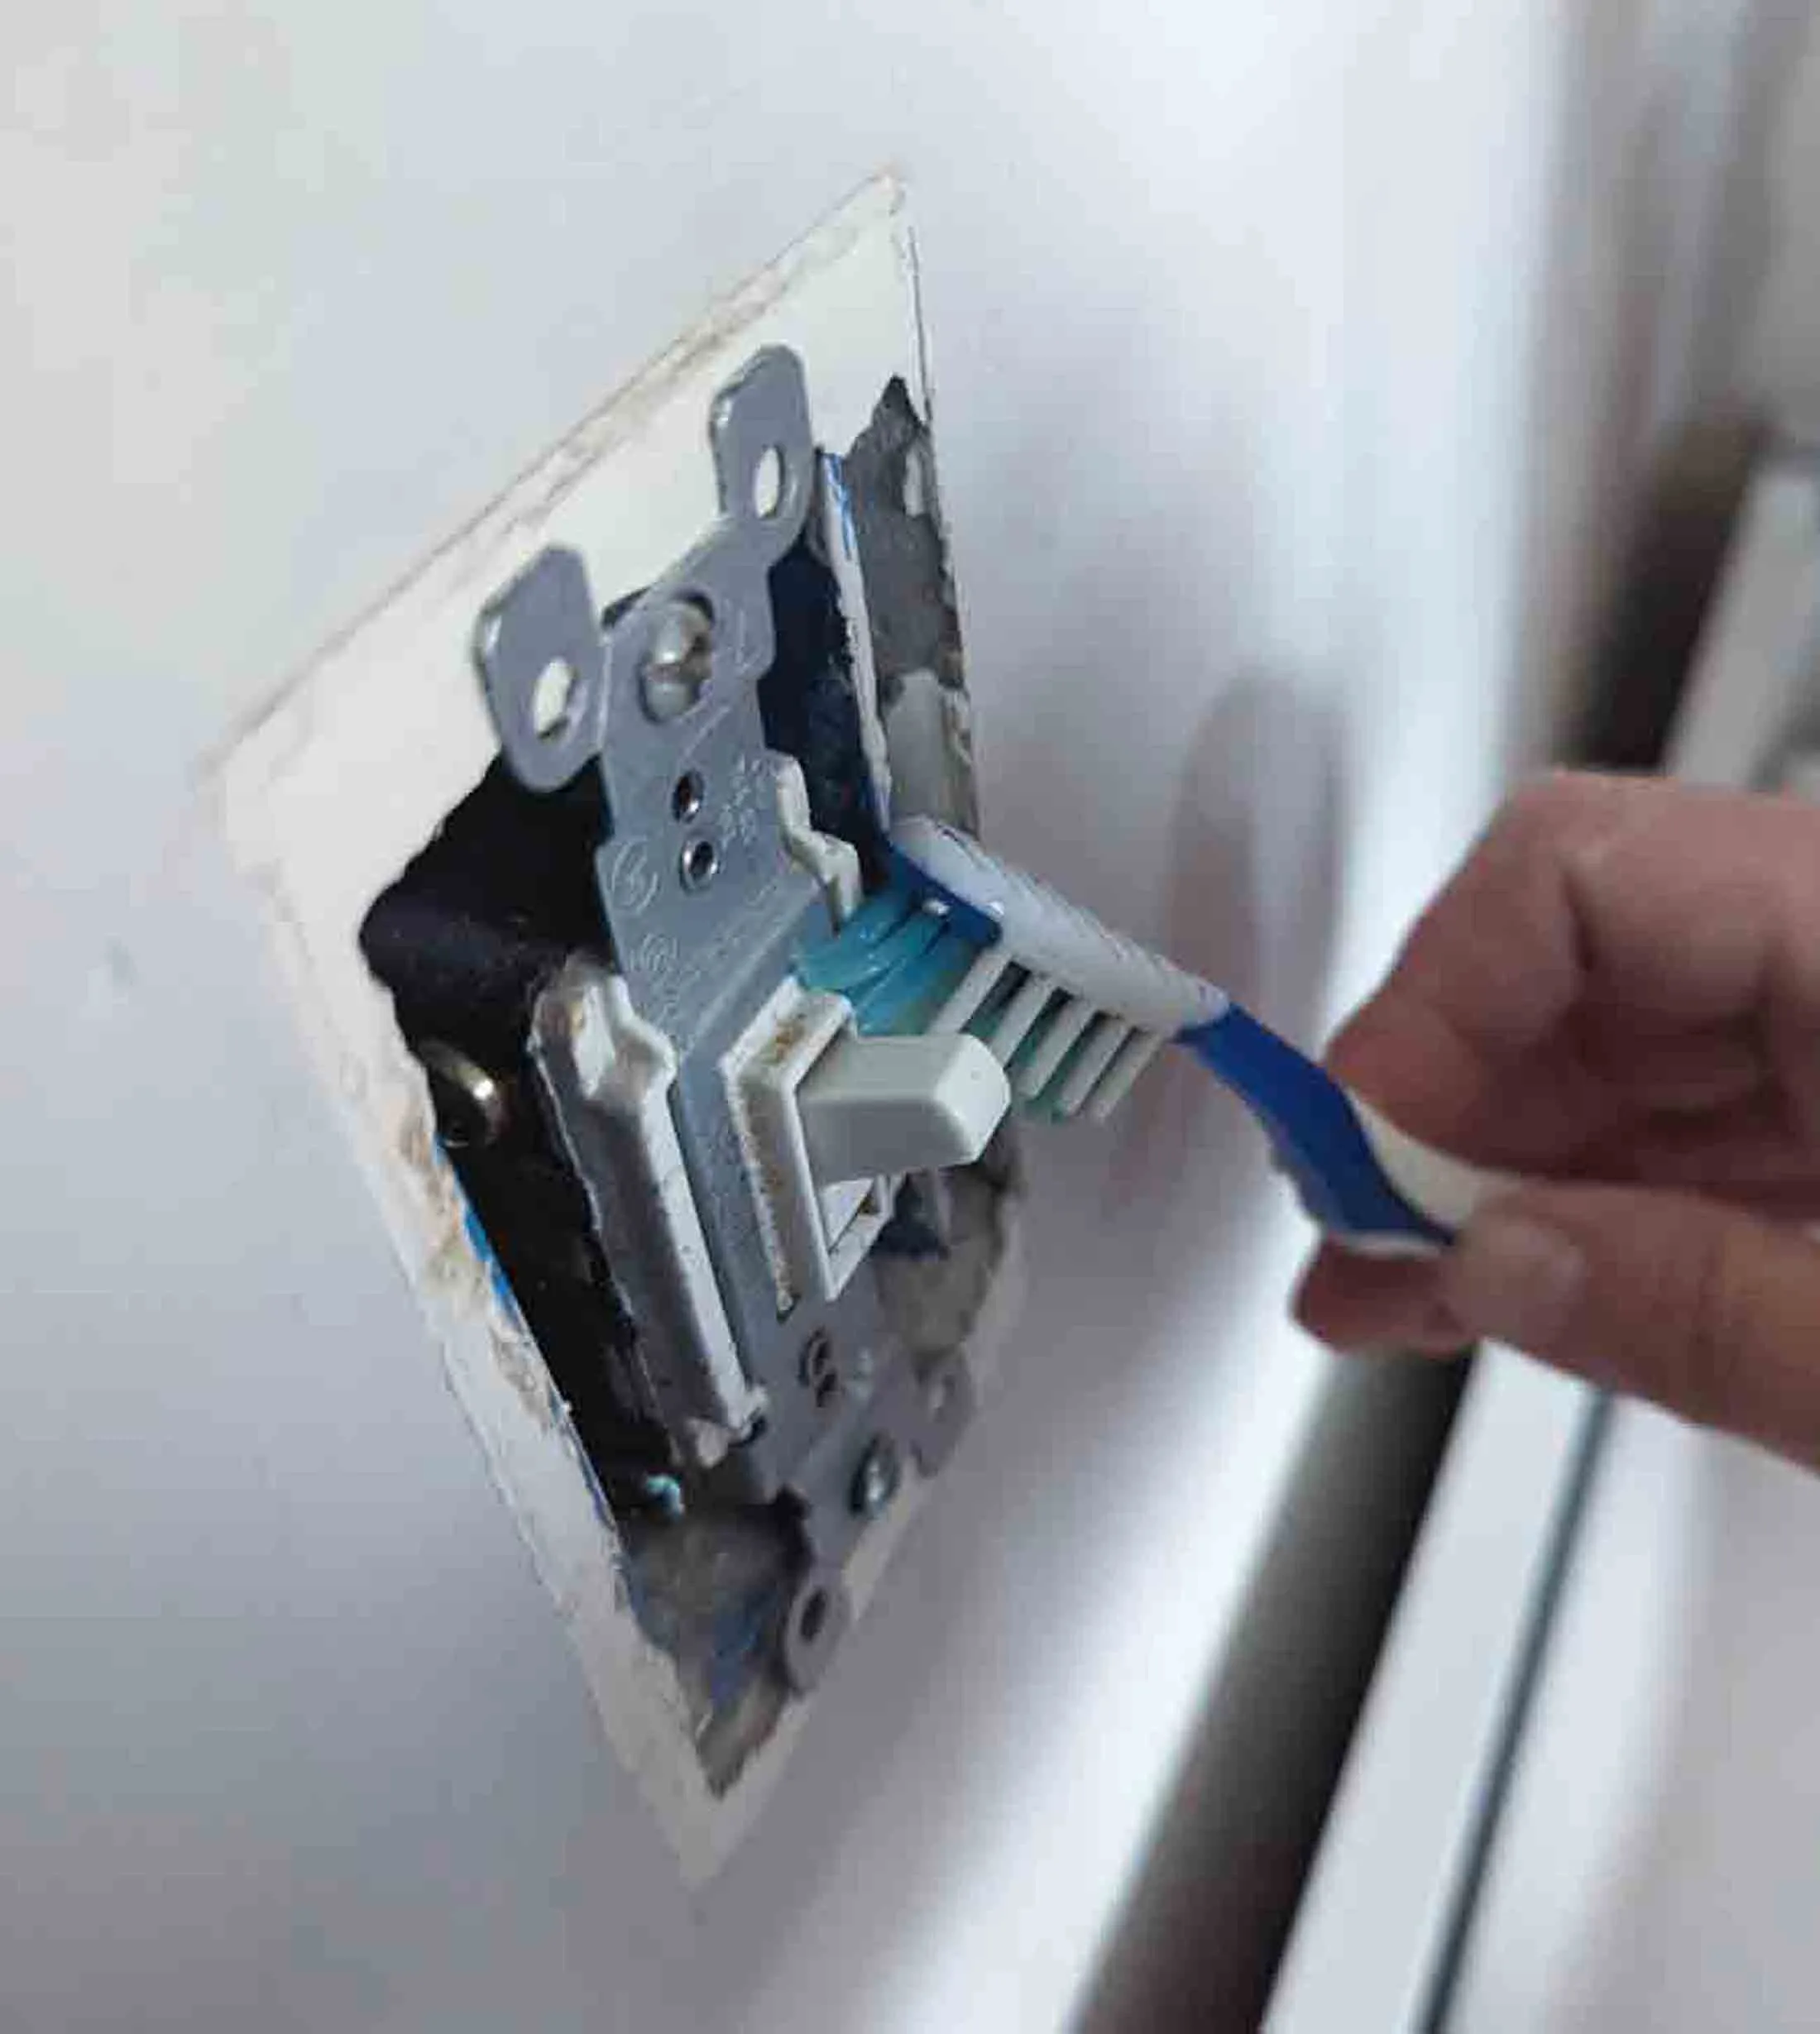 Cleaning a lightswitch using a toothbrush.